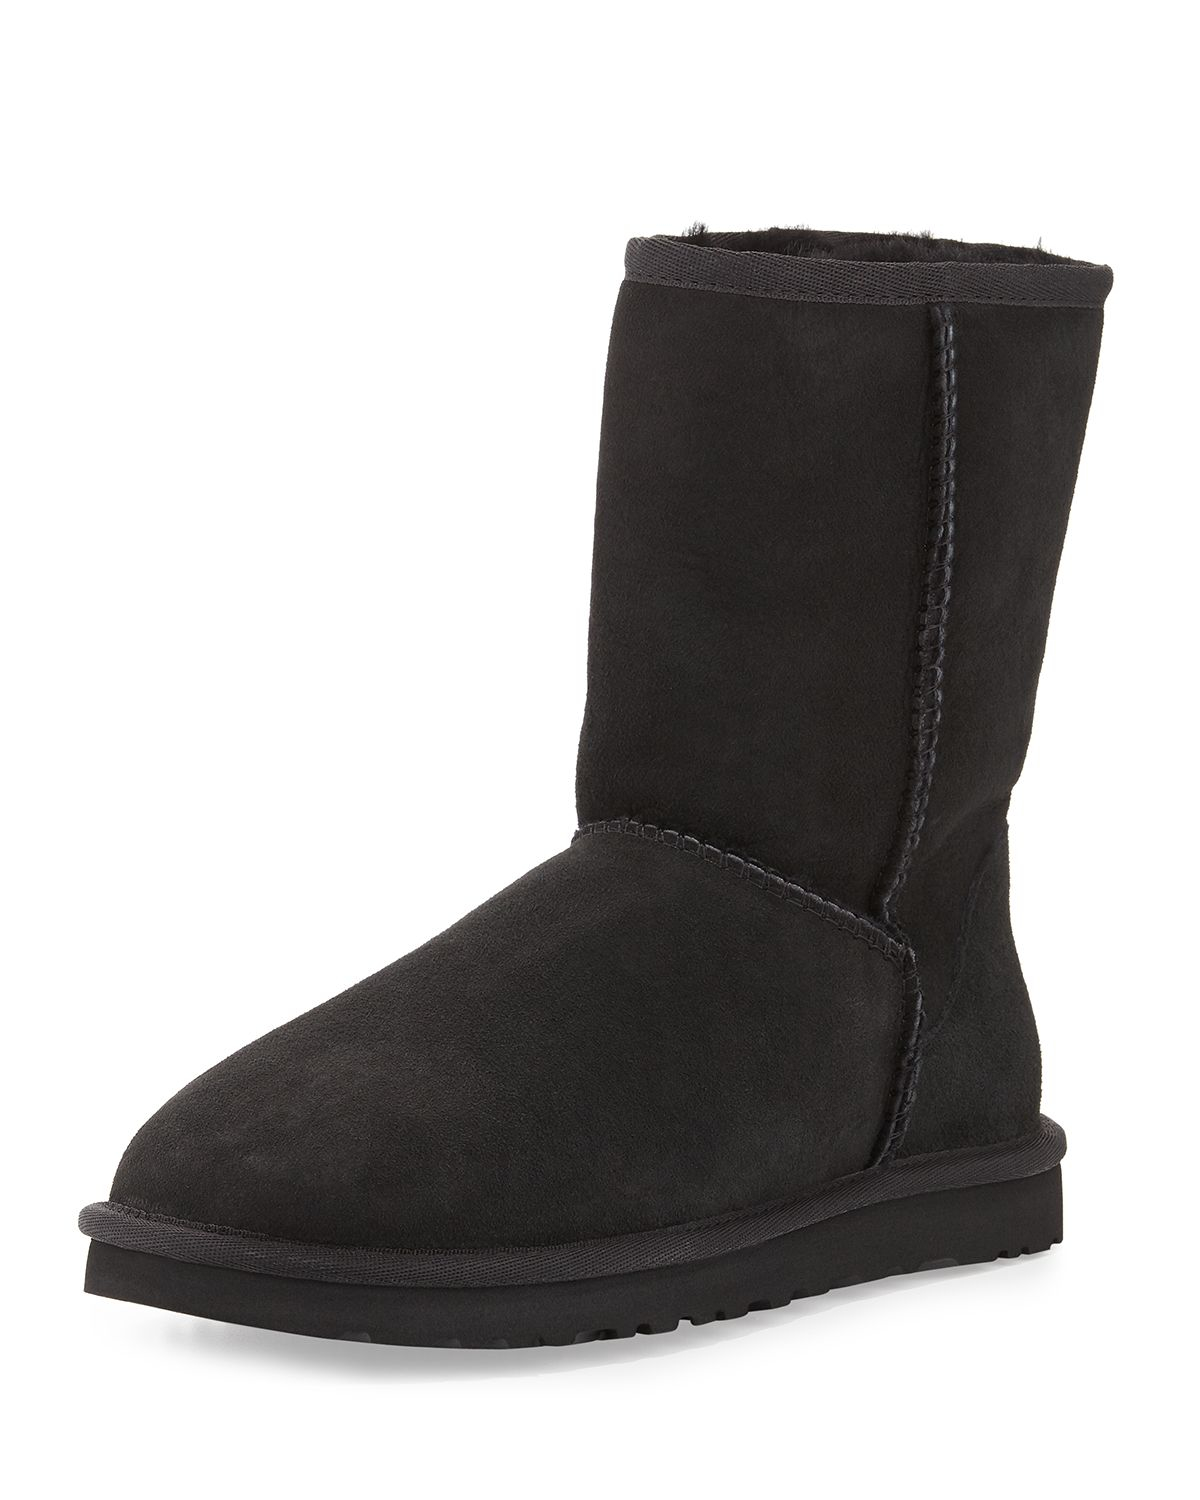 Wolverine Work Boots Composite Toe: Ugg Black Classic Short Boot